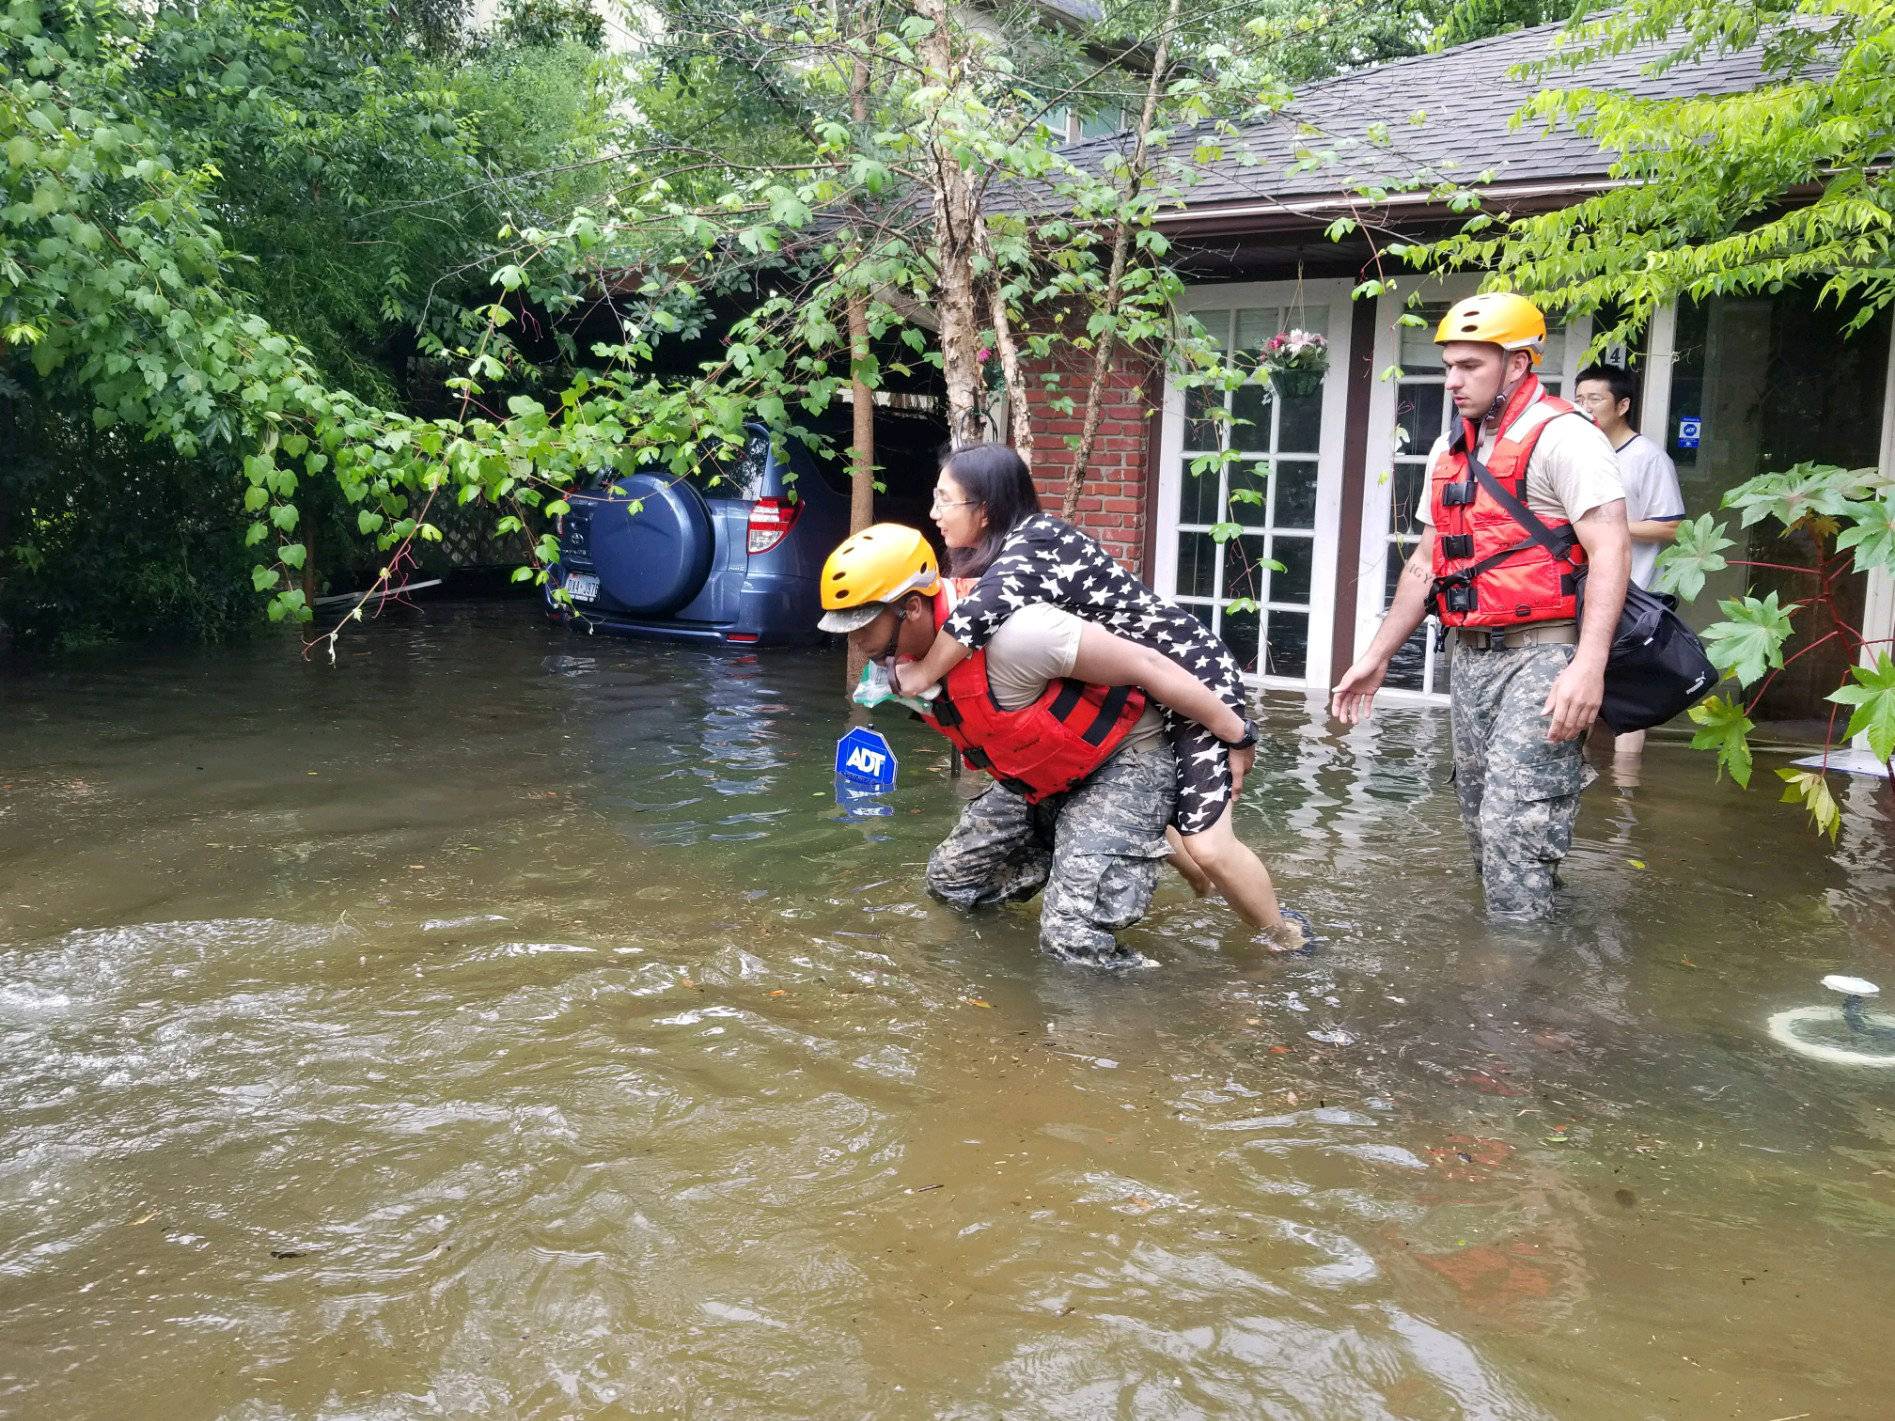 Handout photo of Texas National Guard soldiers aiding stranded residents in heavily flooded areas from the storms of Hurricane Harvey in Houston